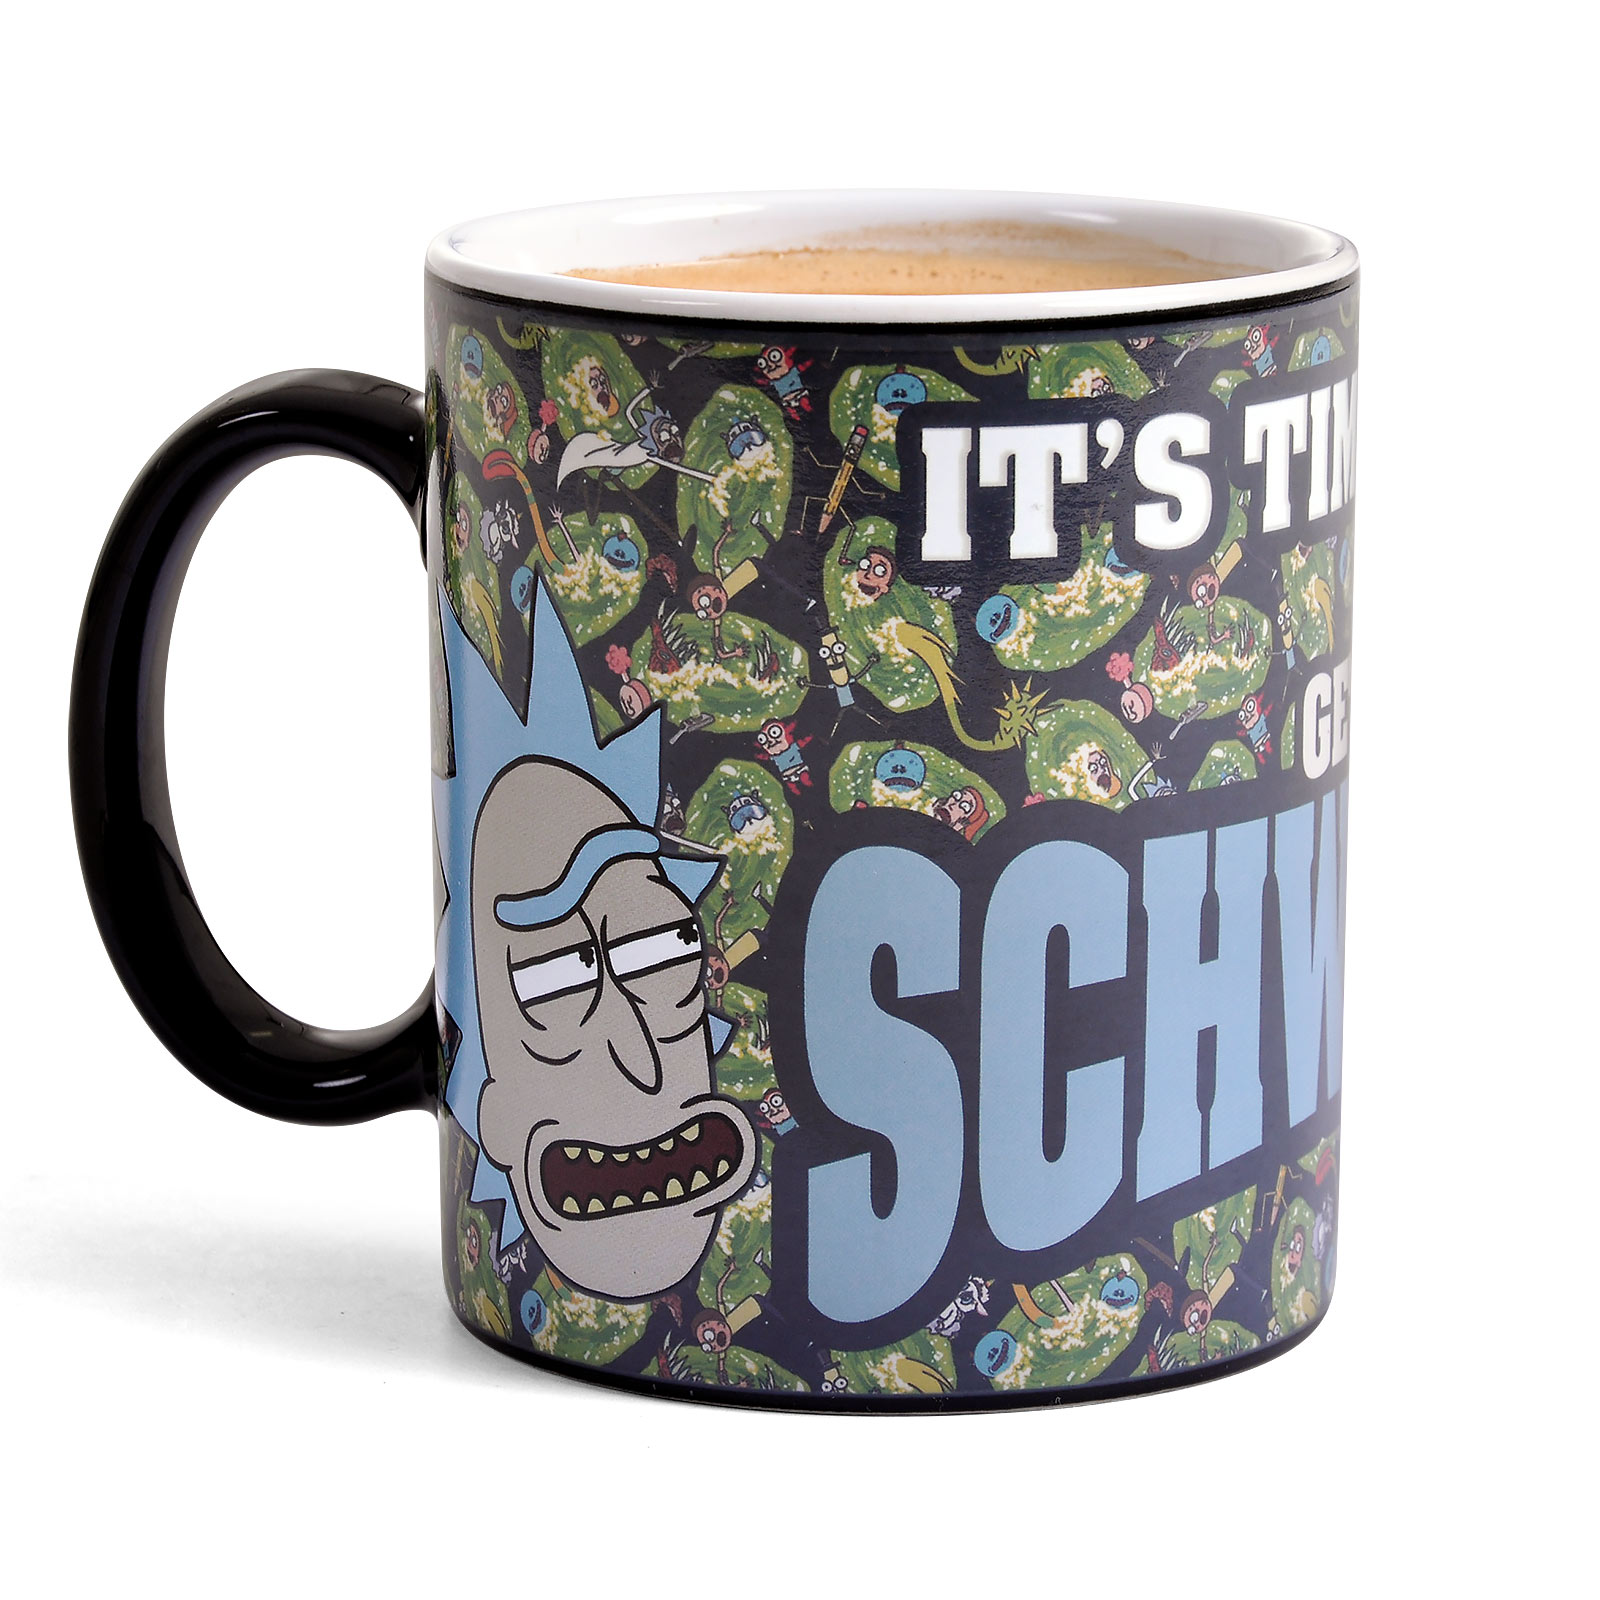 Rick and Morty - Get Schwifty Tasse à effet thermique